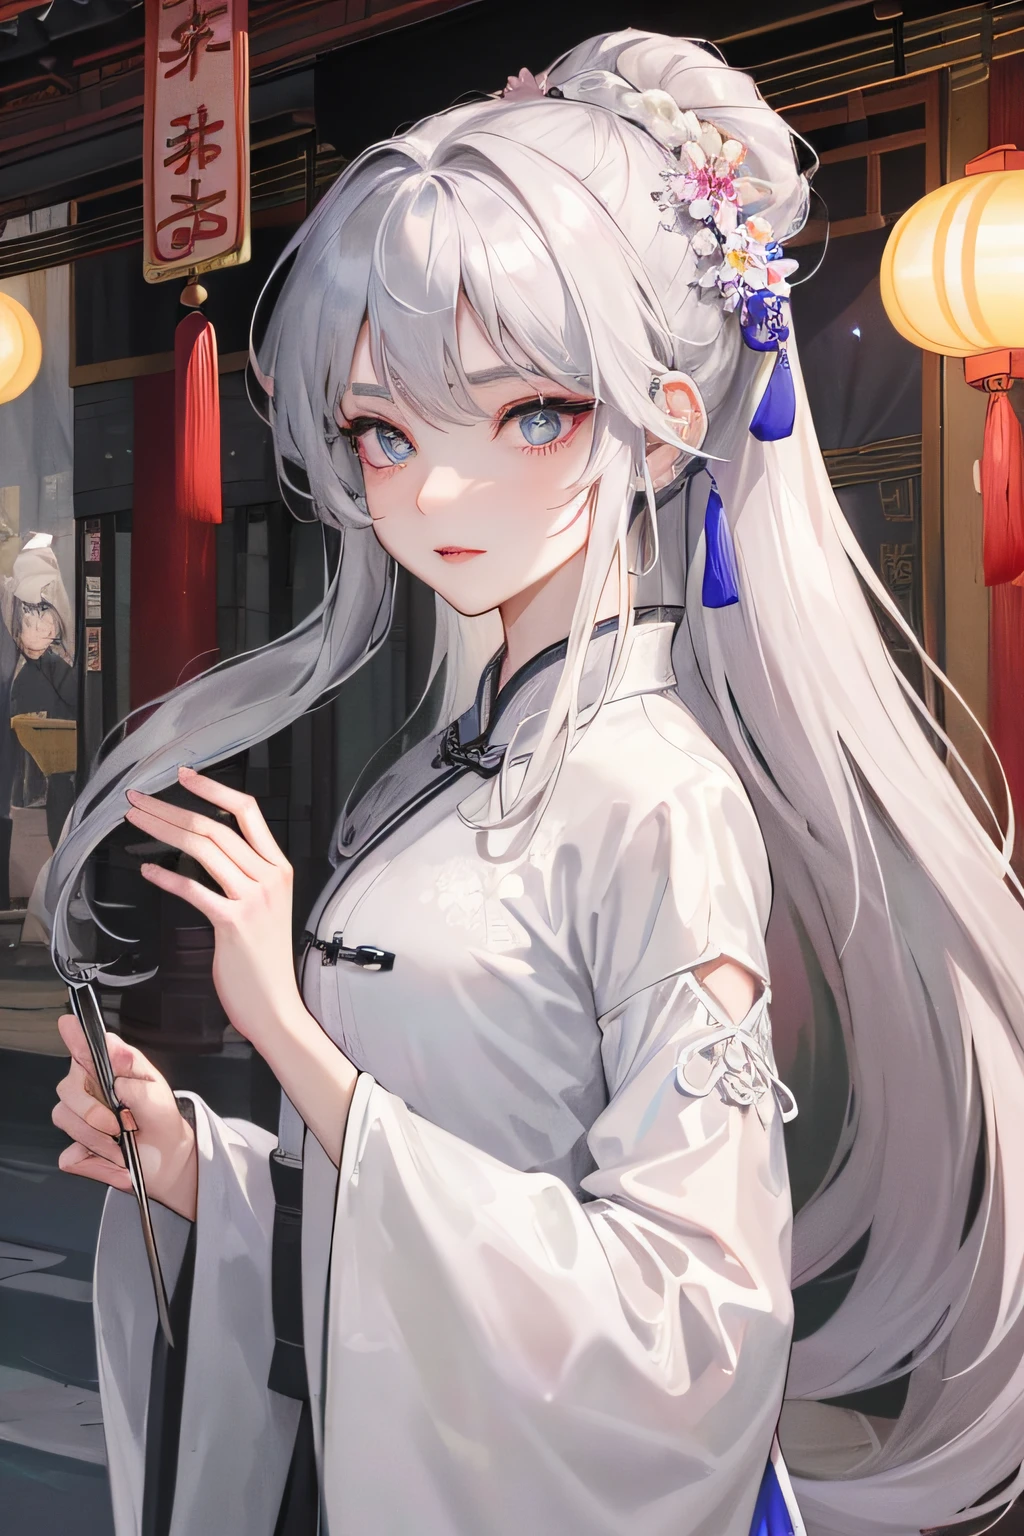 Masterpiece, Best quality, Night, full moon, 1 girl, Mature woman, Chinese style, Ancient China, sister, Royal Sister, Cold expression, Expressionless face, Silver white long haired woman, Light pink lips, calm, Intellectual, tribelt, Gray pupils, assassins, short knife, flower ball background, Stroll through the street view